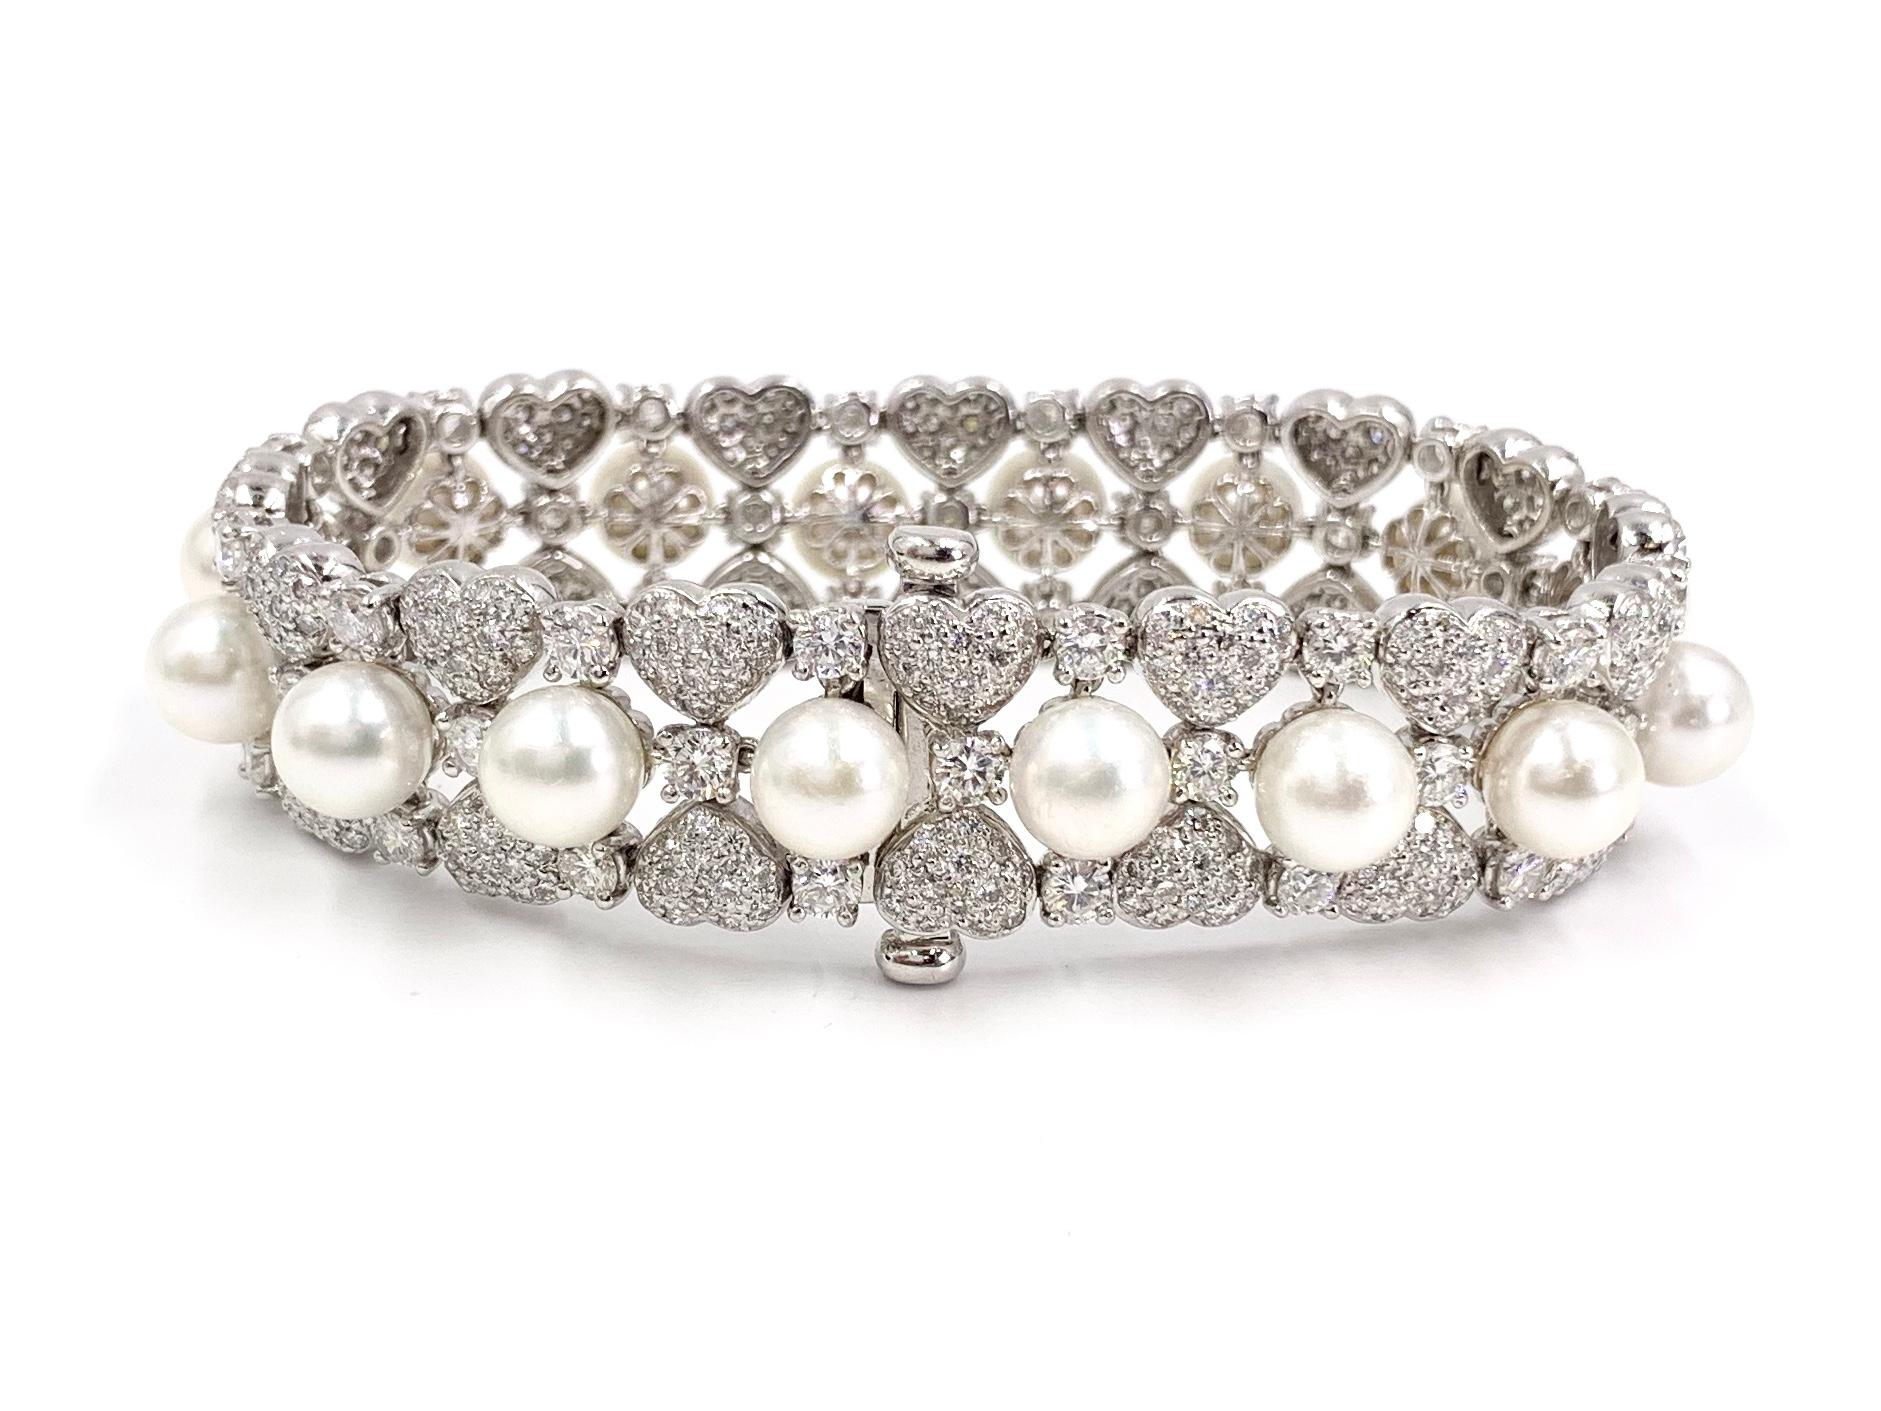 A stunning (and comfortable!) 18 karat white gold white round brilliant diamond and white lustrous pearl 16mm wide bracelet. 11.67 carats of diamonds have an approximate quality of G color, VS2 clarity at 11.67 carats total weight. 7mm well rounded